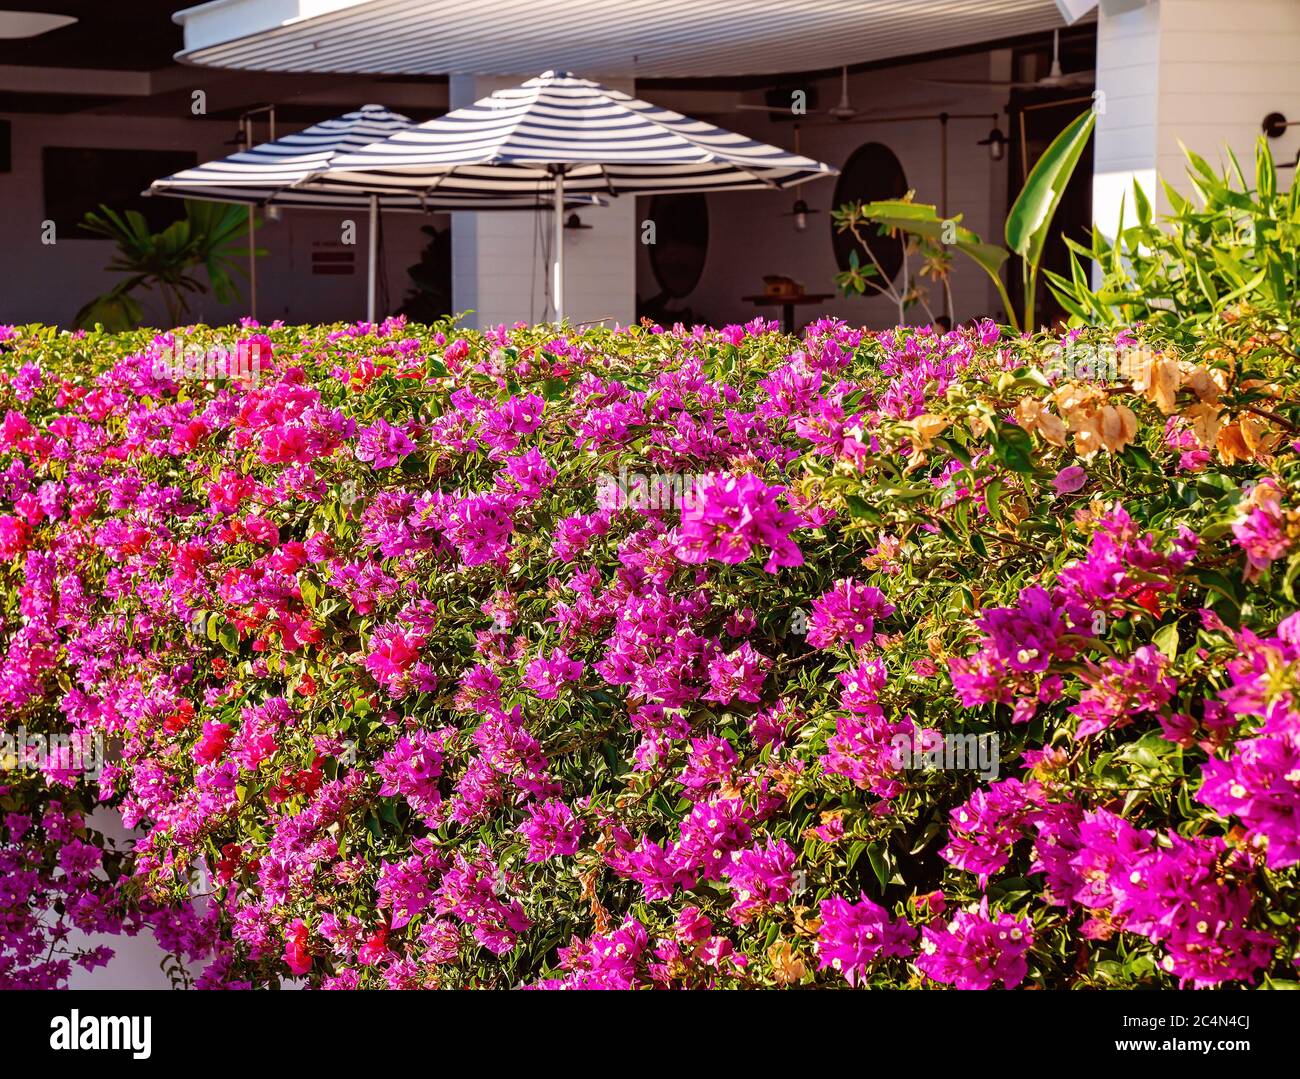 A hedge of bright pink bougainvillea in front of an outdoor area at a luxury resort hotel Stock Photo